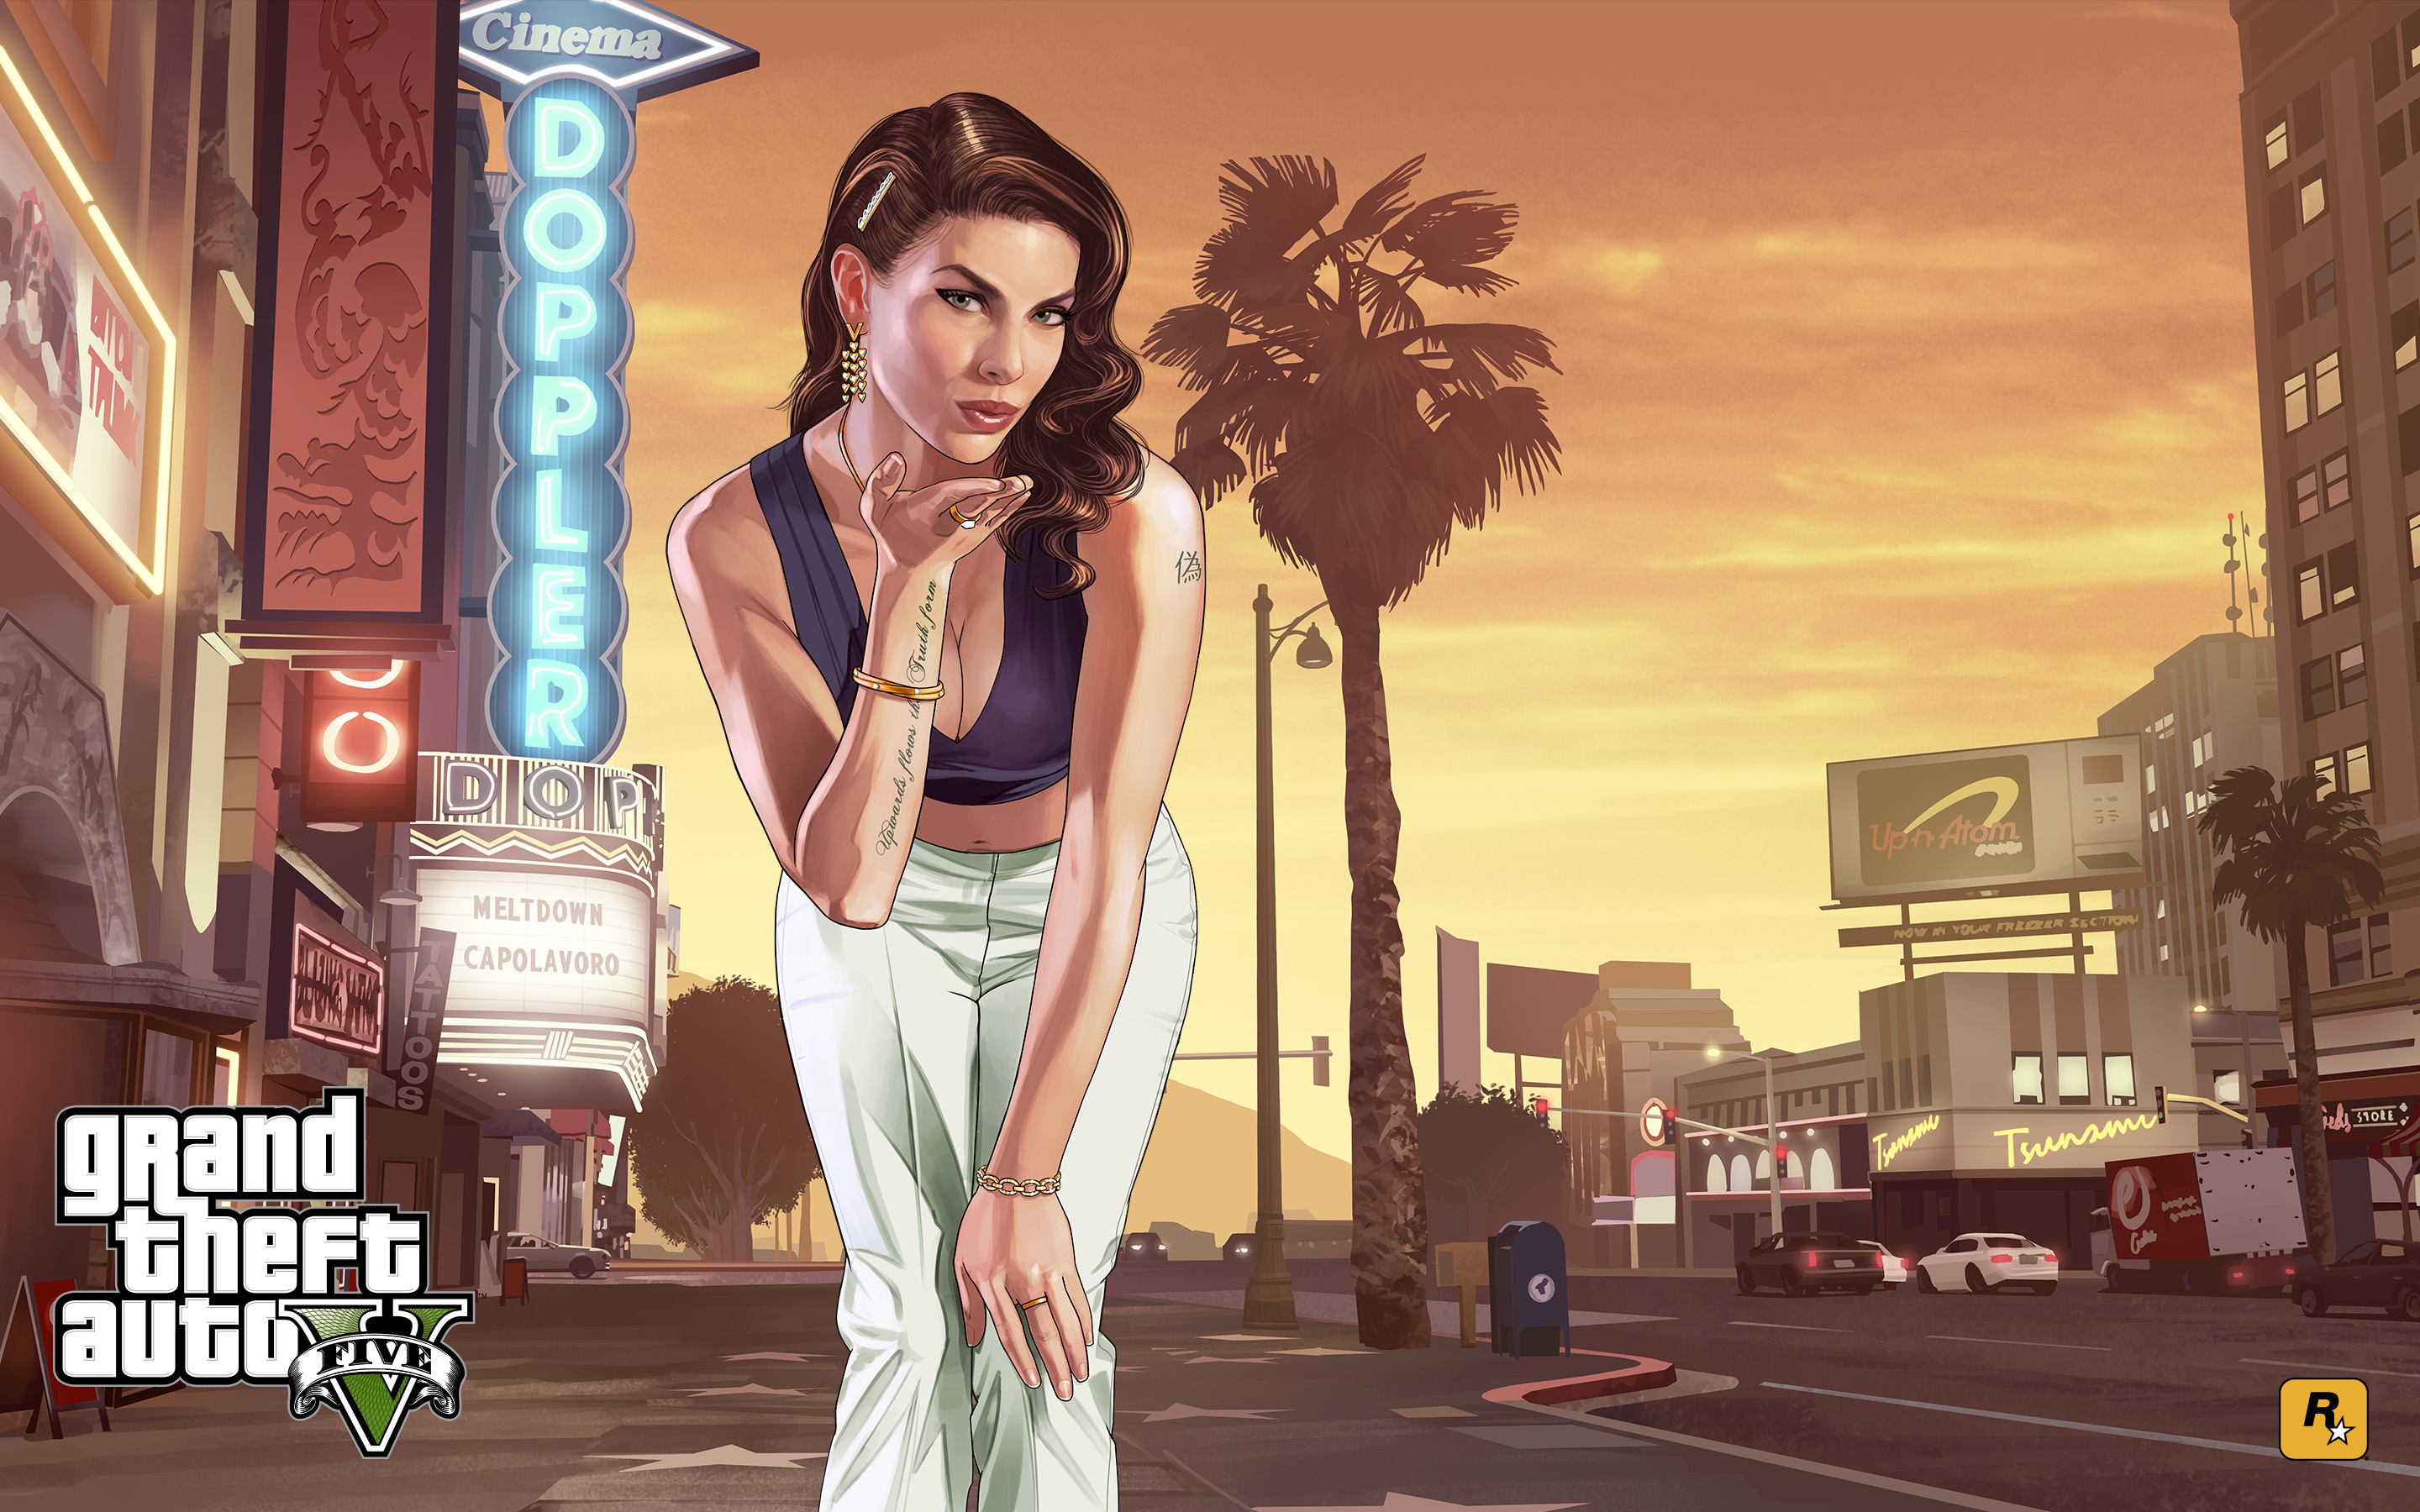 General 2880x1800 Rockstar Games video games video game art Grand Theft Auto Grand Theft Auto V PC gaming palm trees city urban video game girls bracelets inked girls brunette looking at viewer